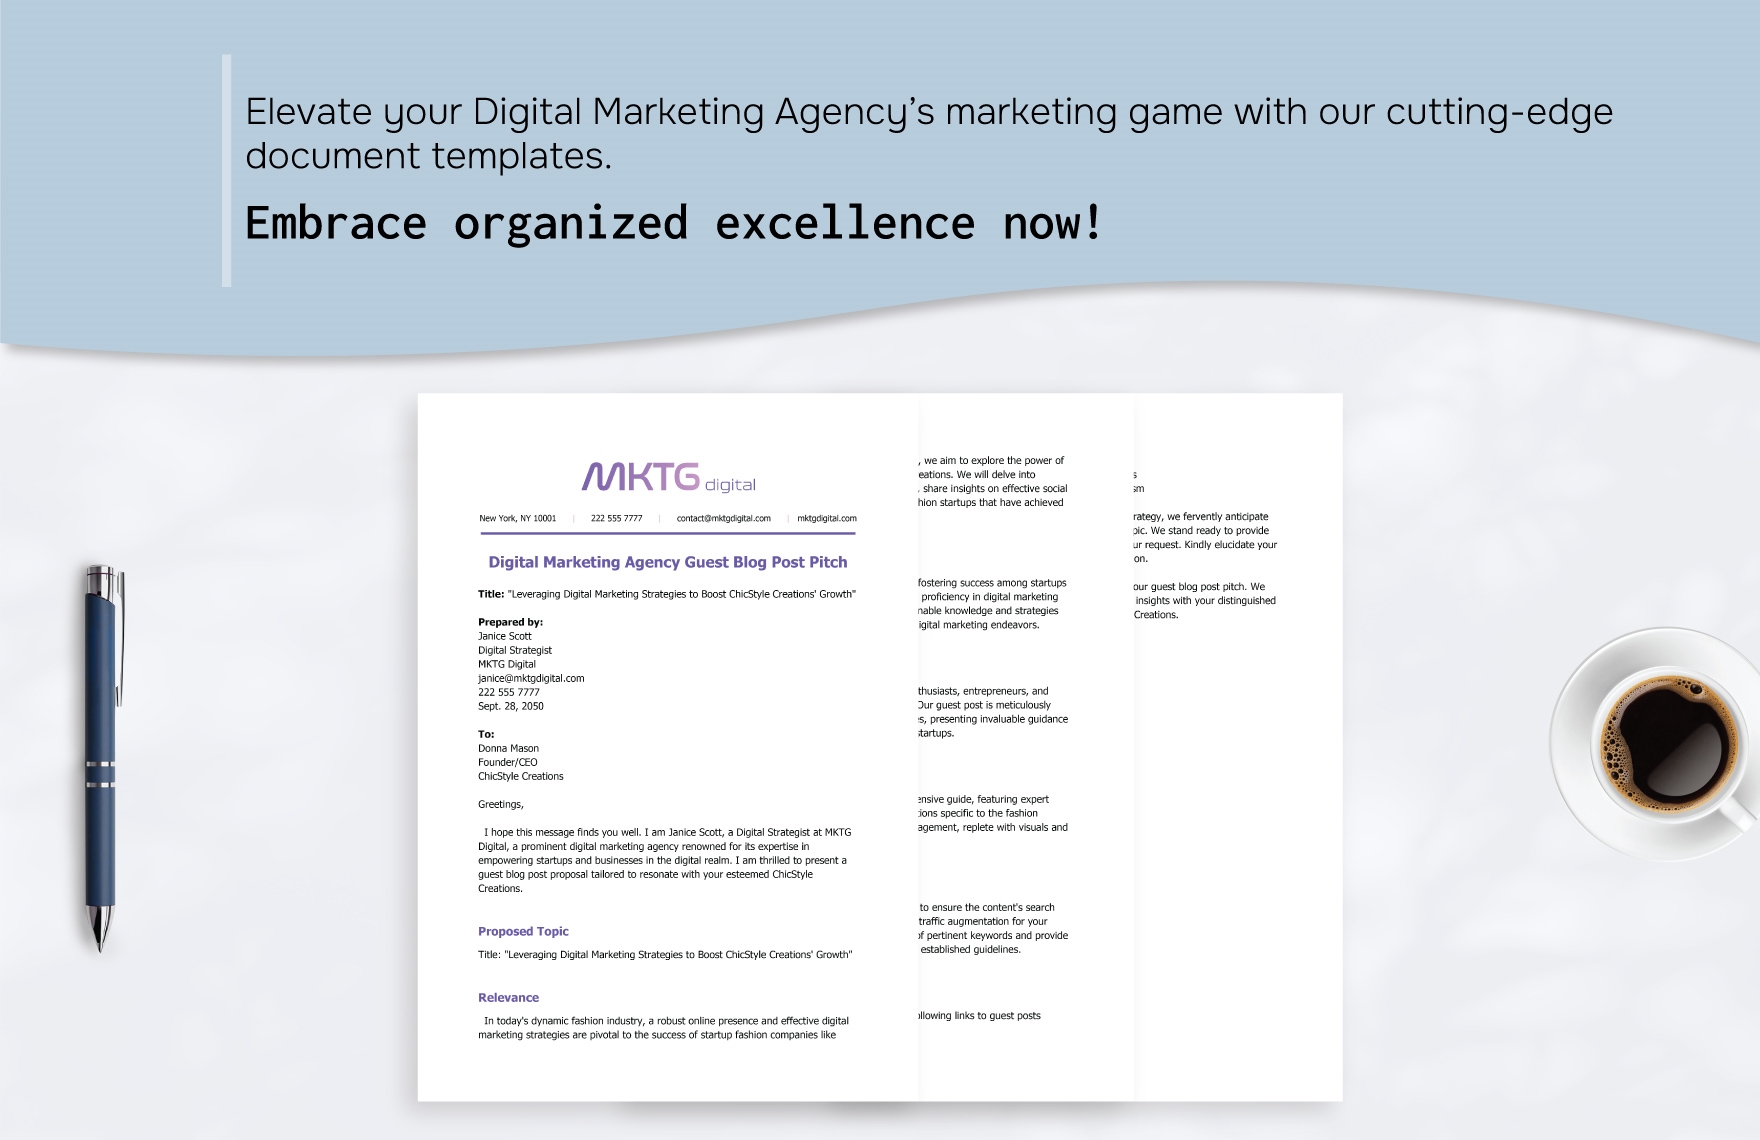 Digital Marketing Agency Guest Blog Post Pitch Template